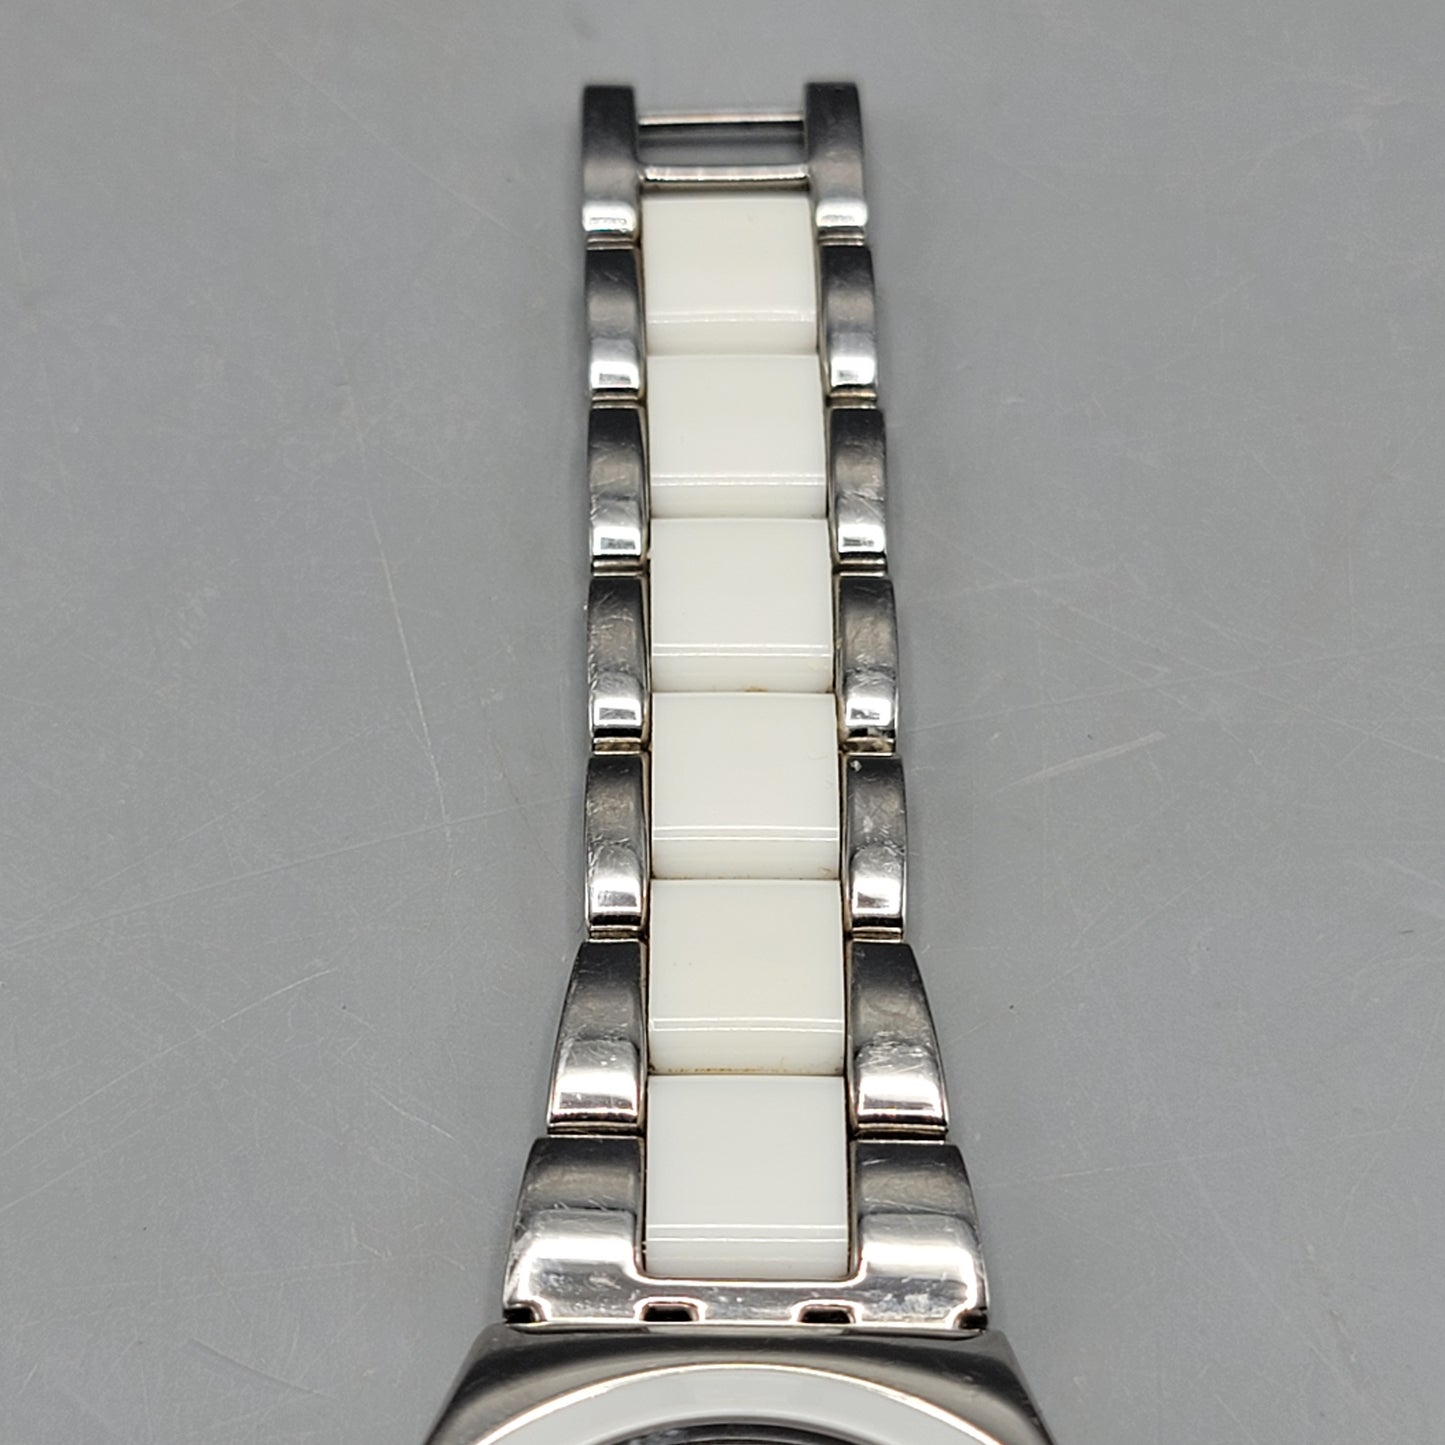 Swatch Irony Quartz Movement Watch with White Dial